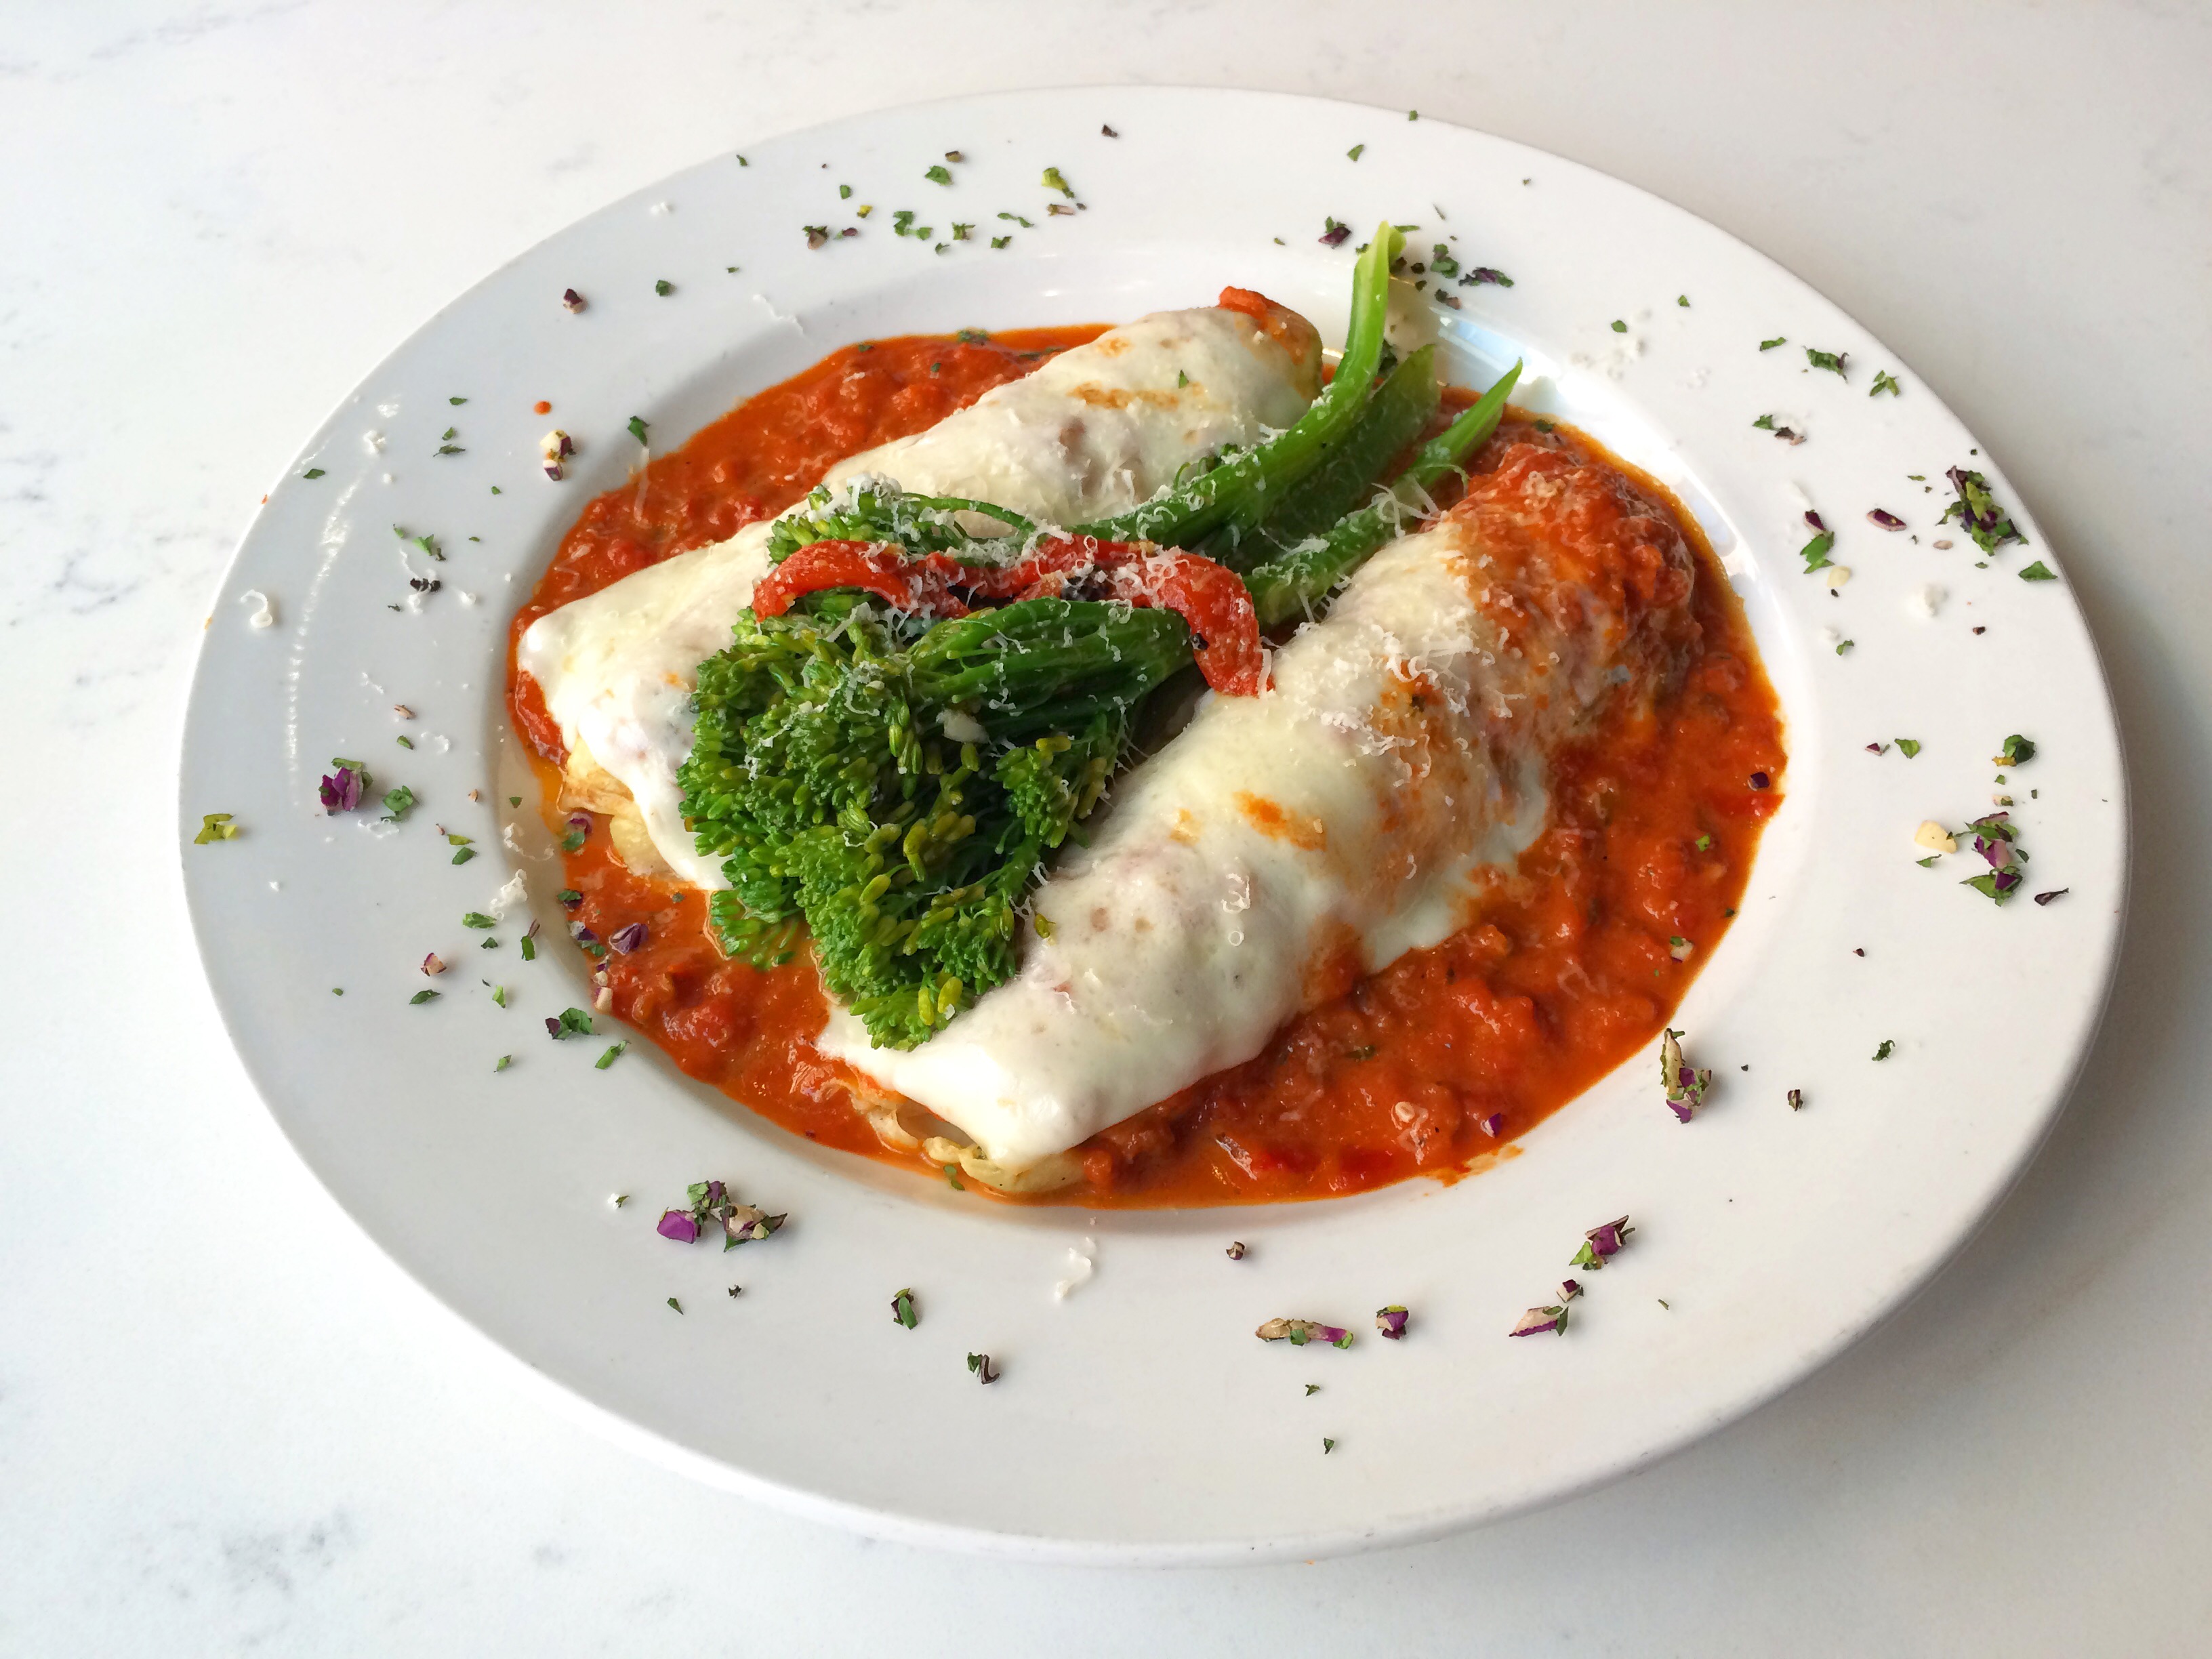 Mancuso's brings its northern Italian family recipes, like beef and veal cannelloni, to Downtown Phoenix. (Photo: Lauren Potter)